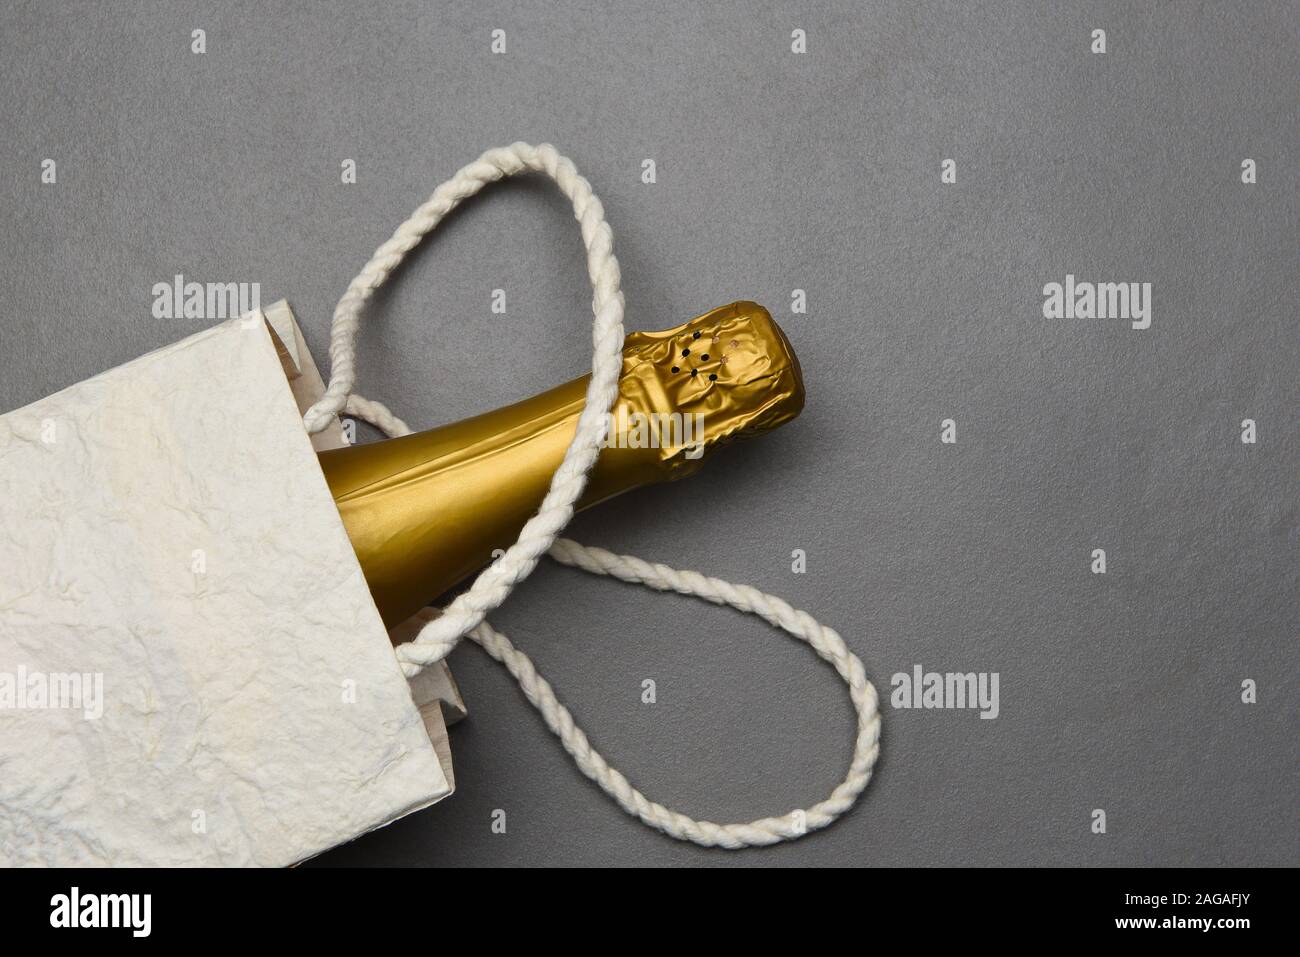 Champagne: Gift Bag with a bottle of sparkling wine on gray tile surface. Stock Photo